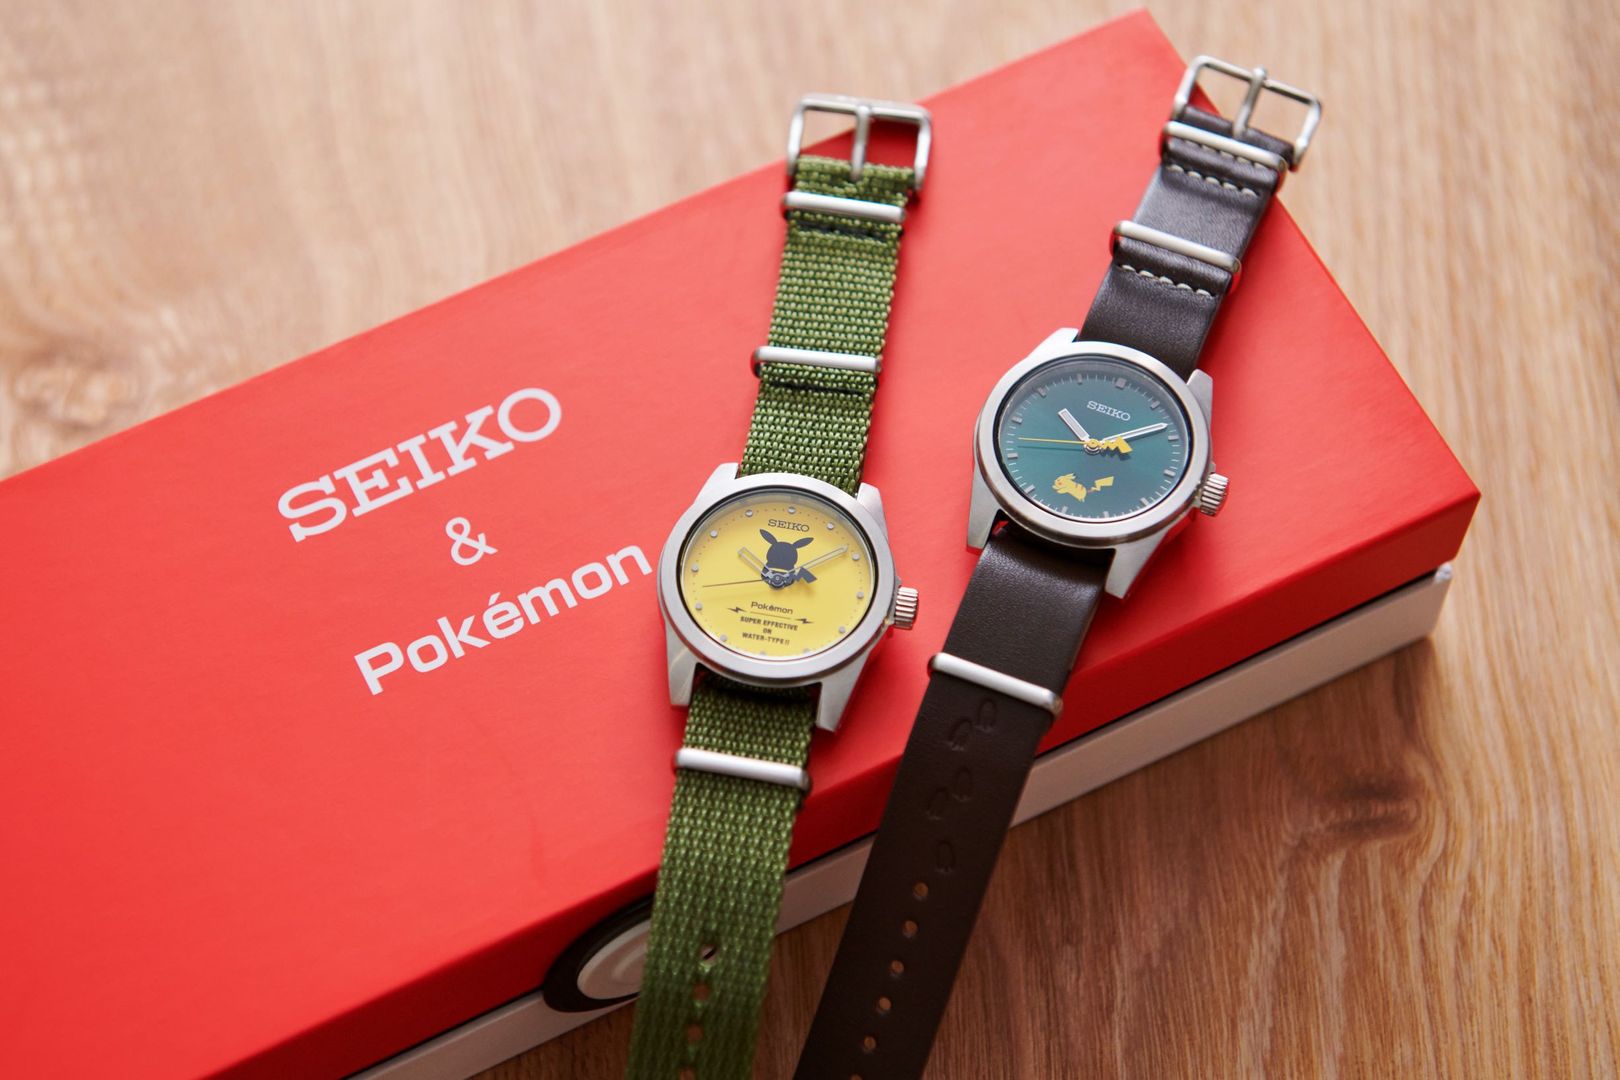 Seiko launches limited-edition Pokémon watch collection | ONE Esports